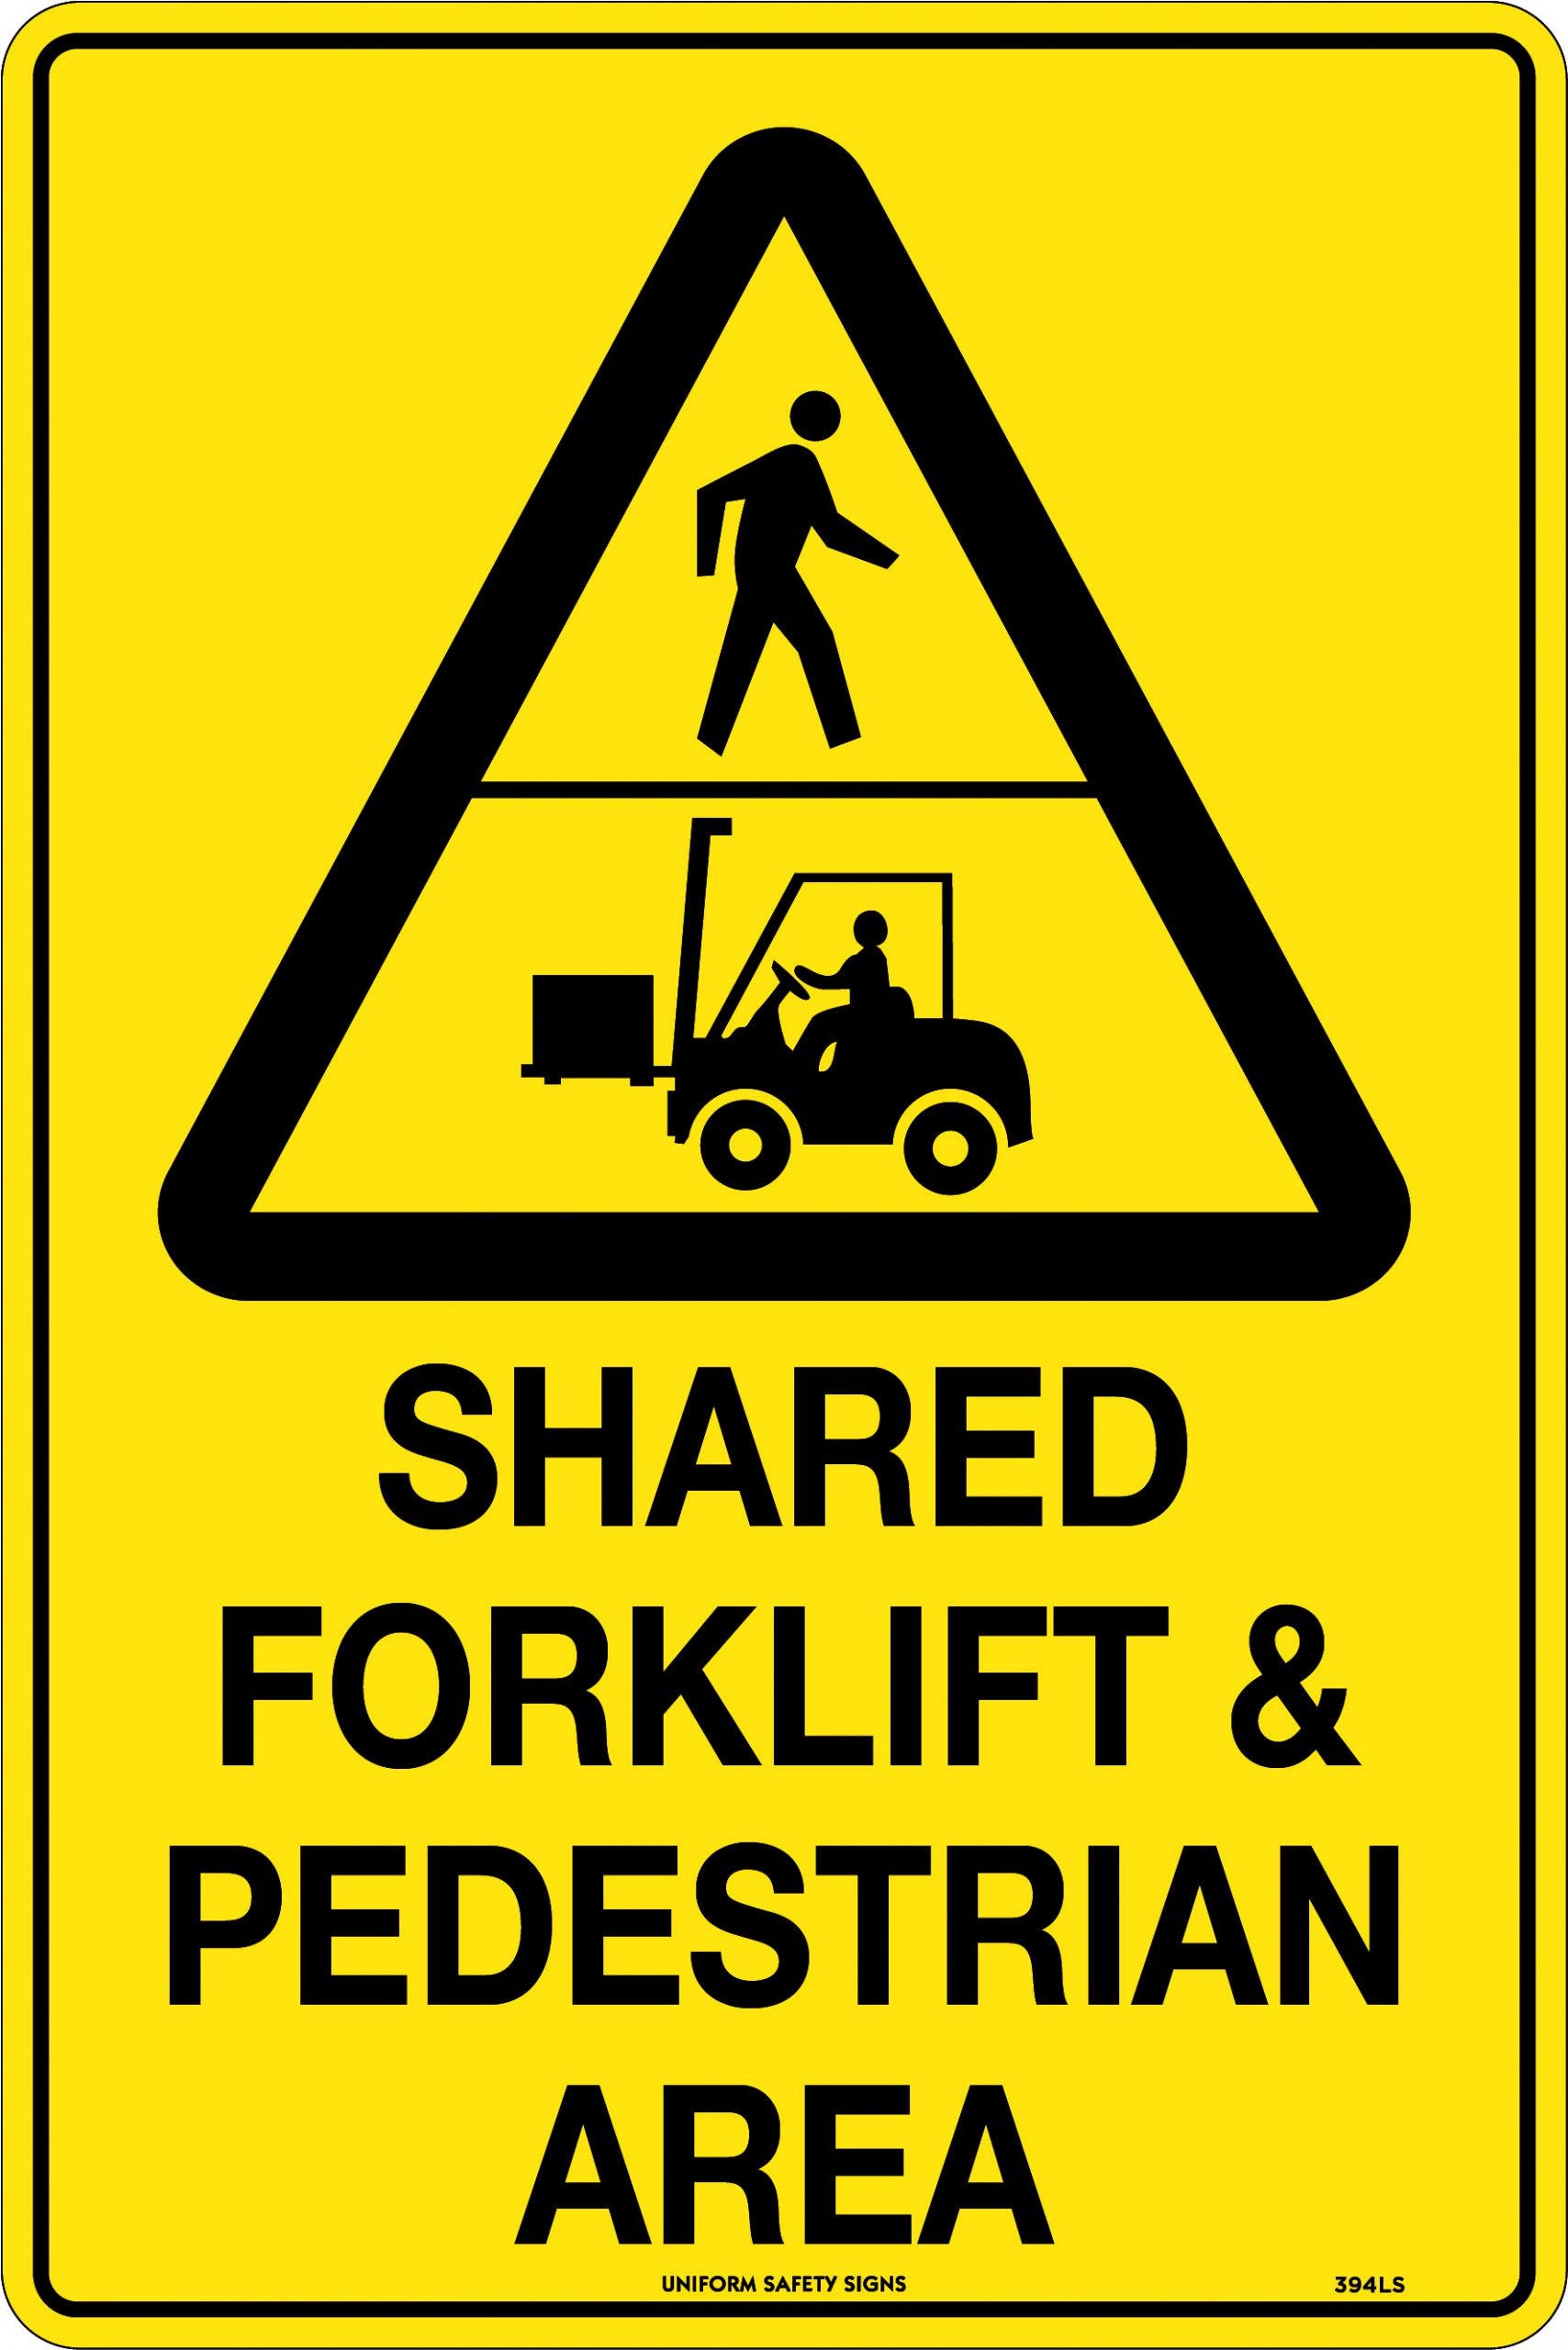 Caution Forklift Traffic Signs